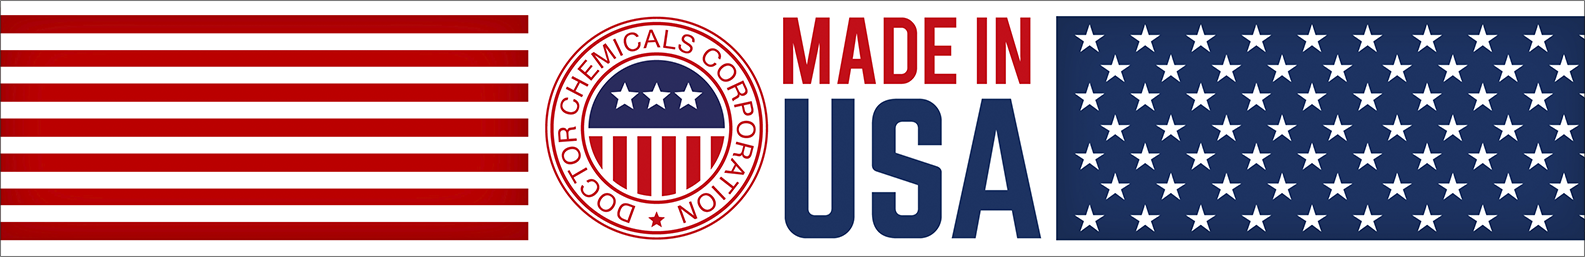 Made in USA Banner